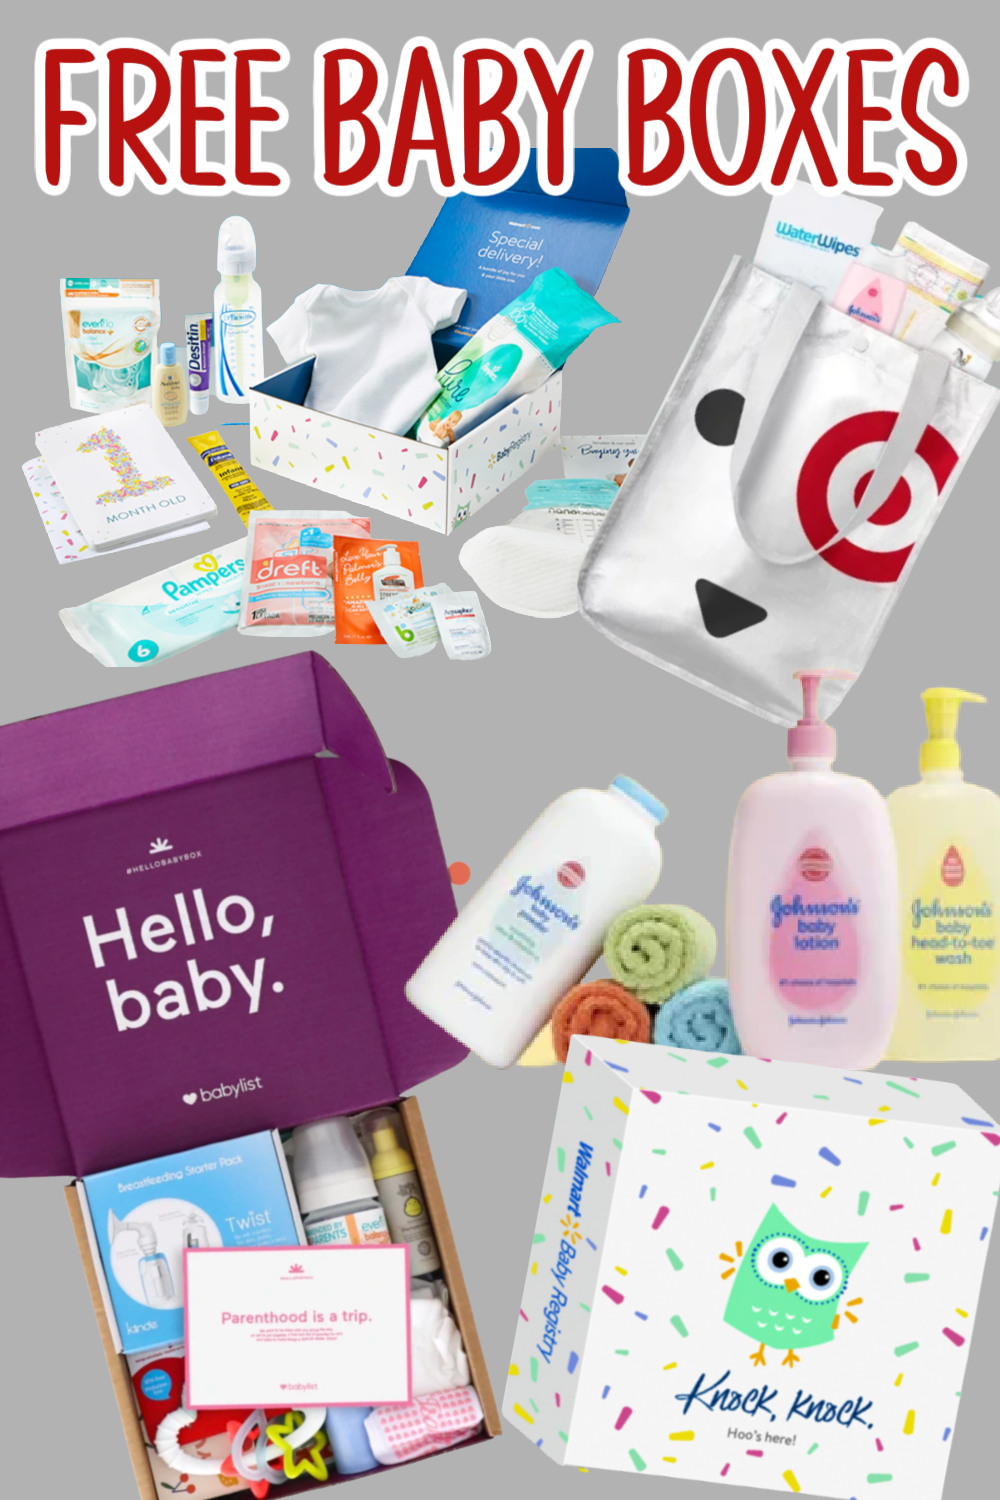 Baby product freebies